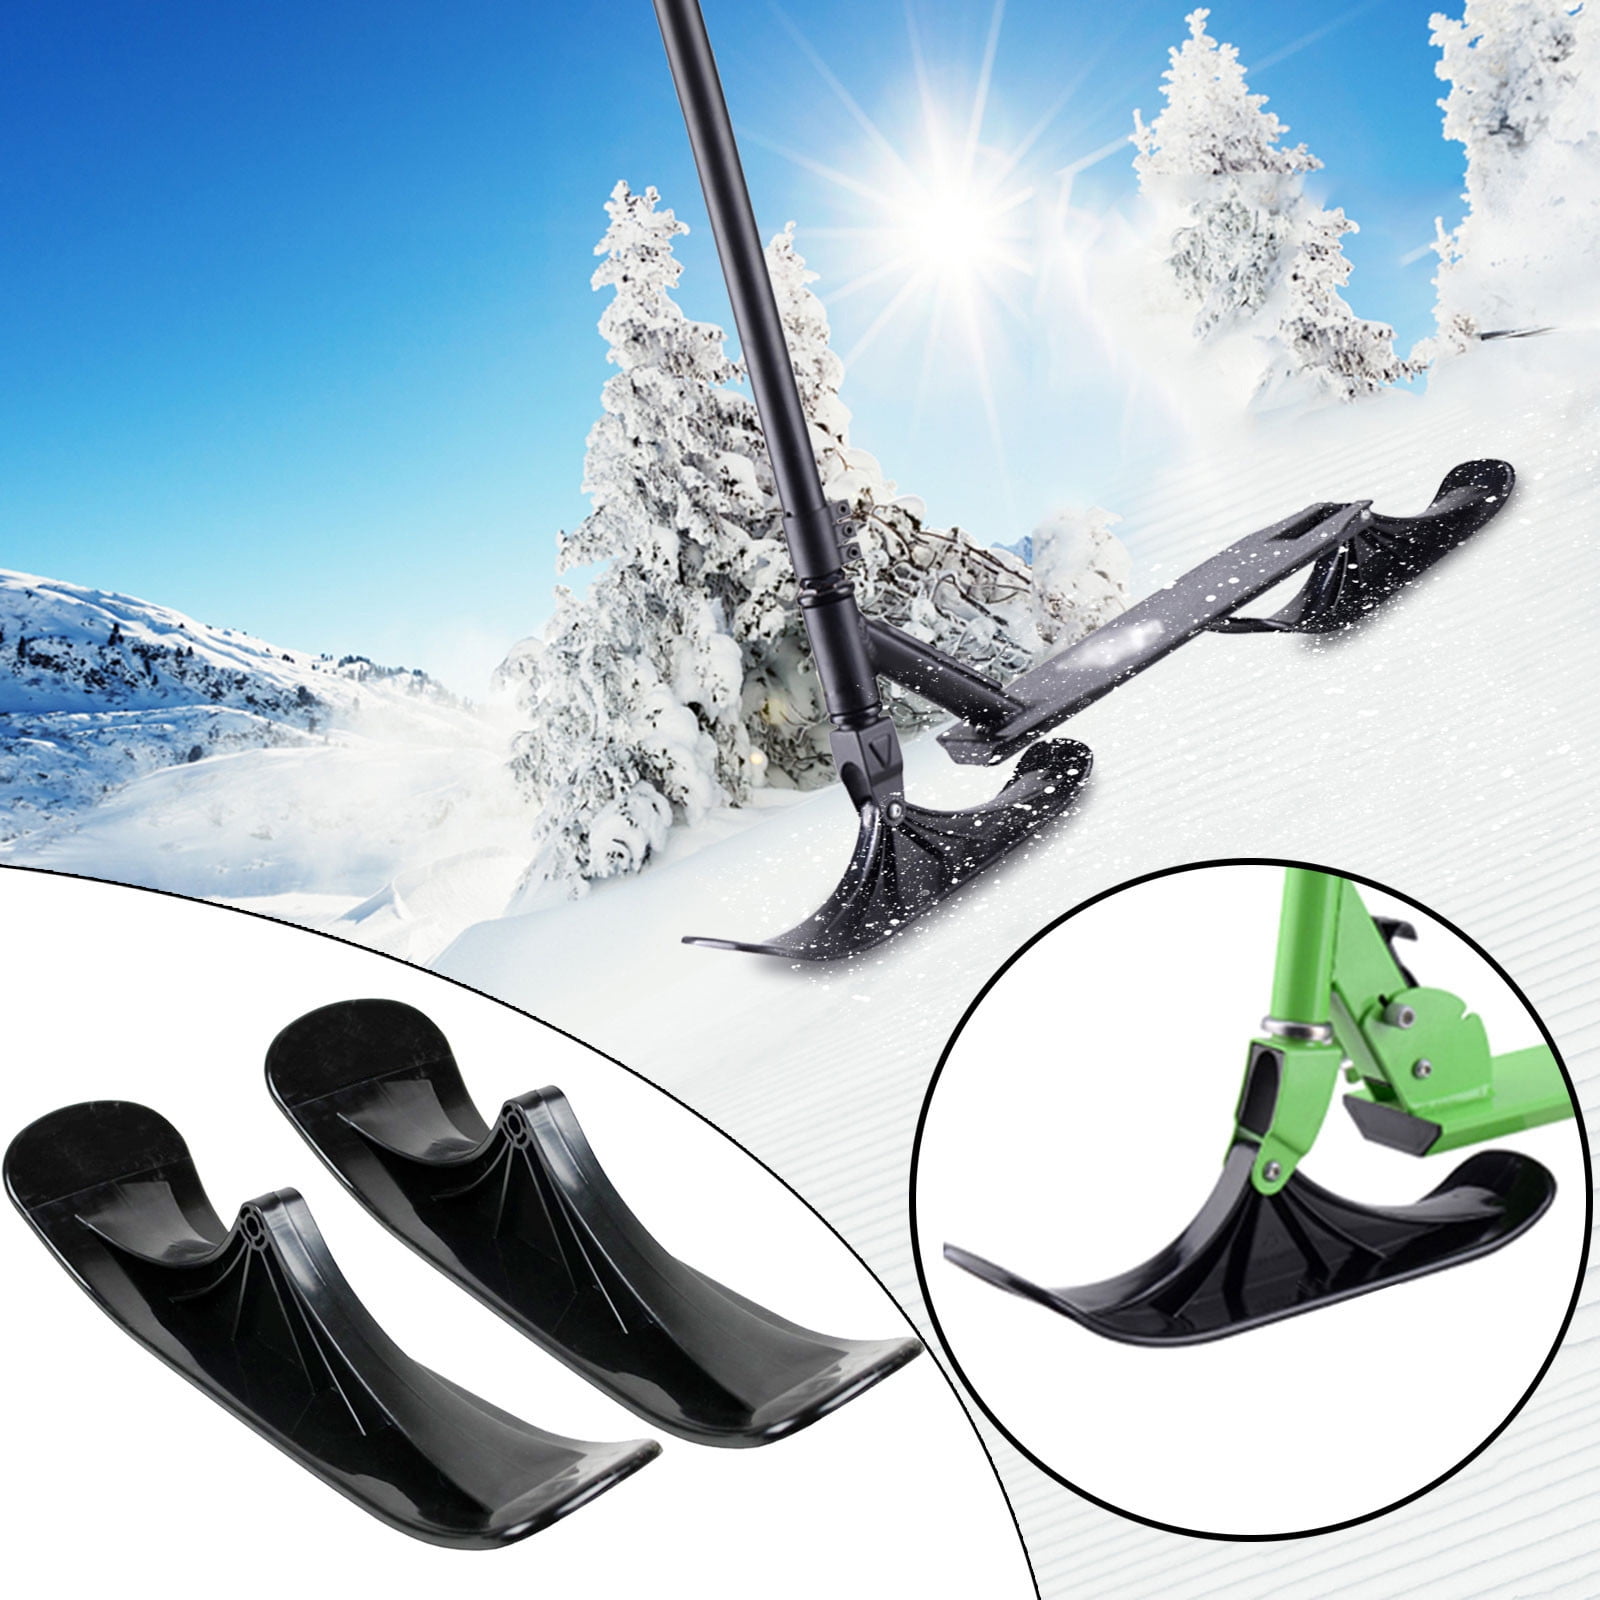 Demeras 1 Pair Of Scooter Sled Snow Sled Ski Board Sleigh Accessories Snow Scooter for Balance Bikes Sports on The Snow